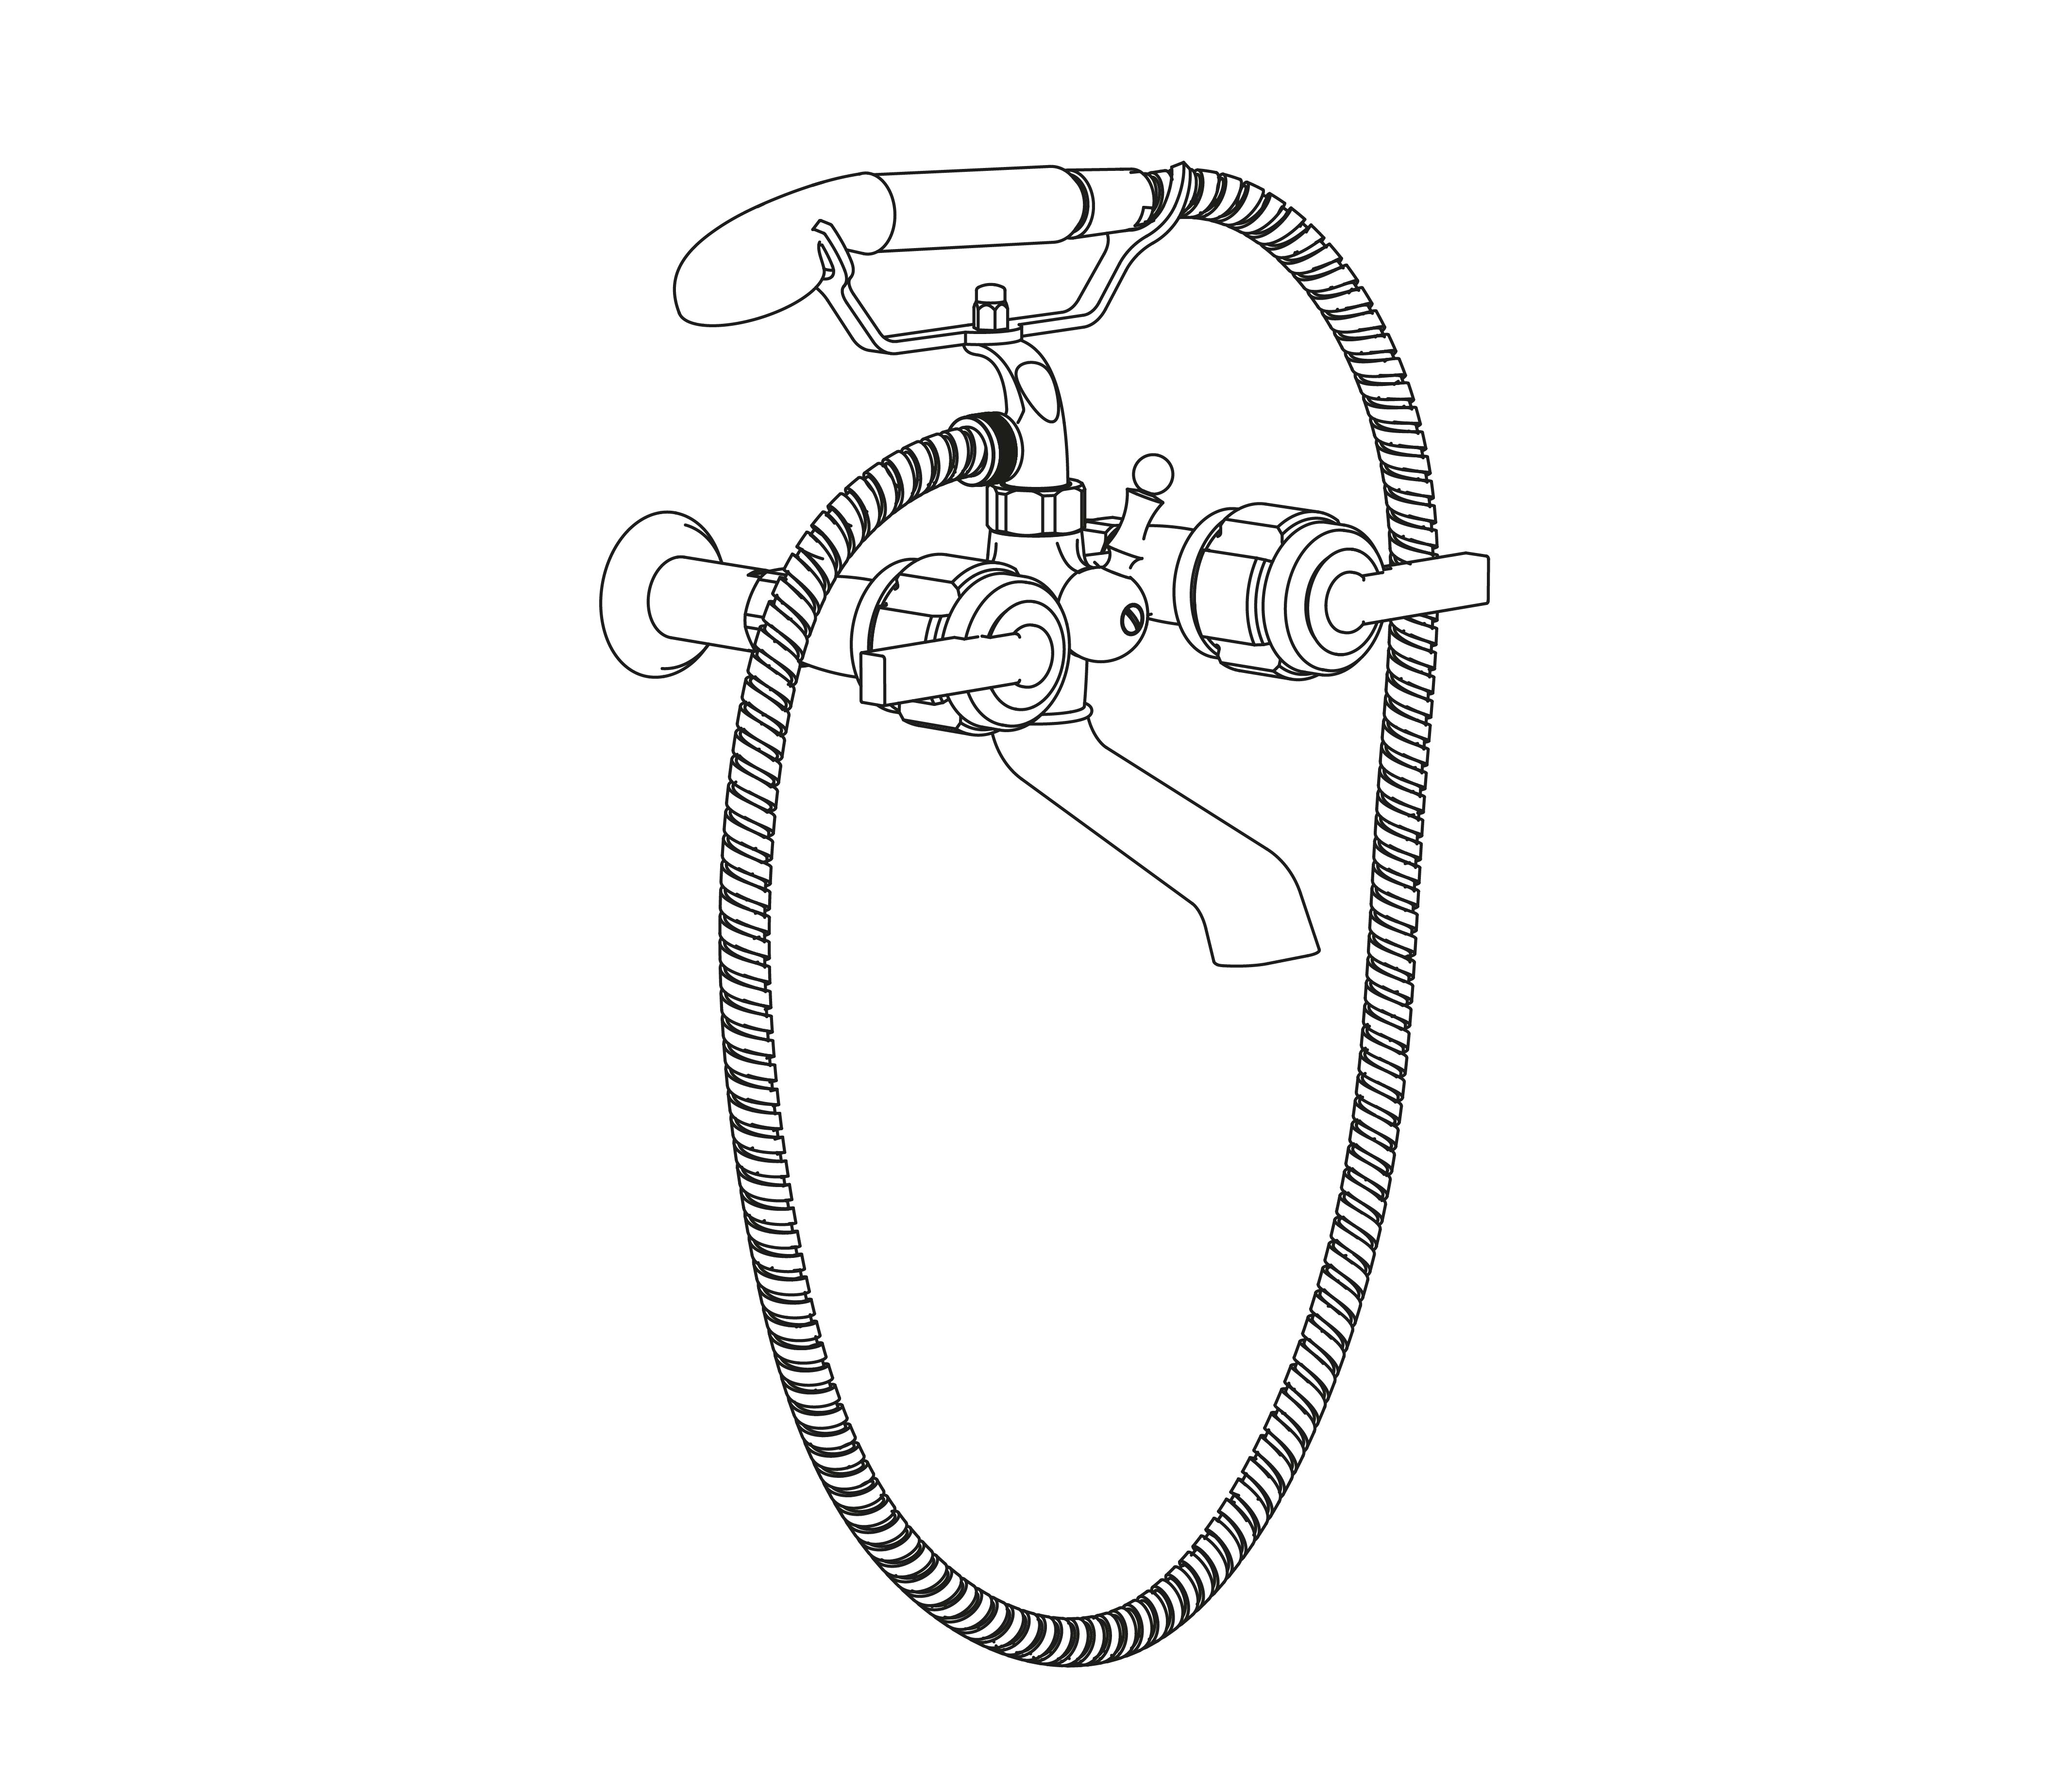 S86-3201 Wall mounted bath and shower mixer